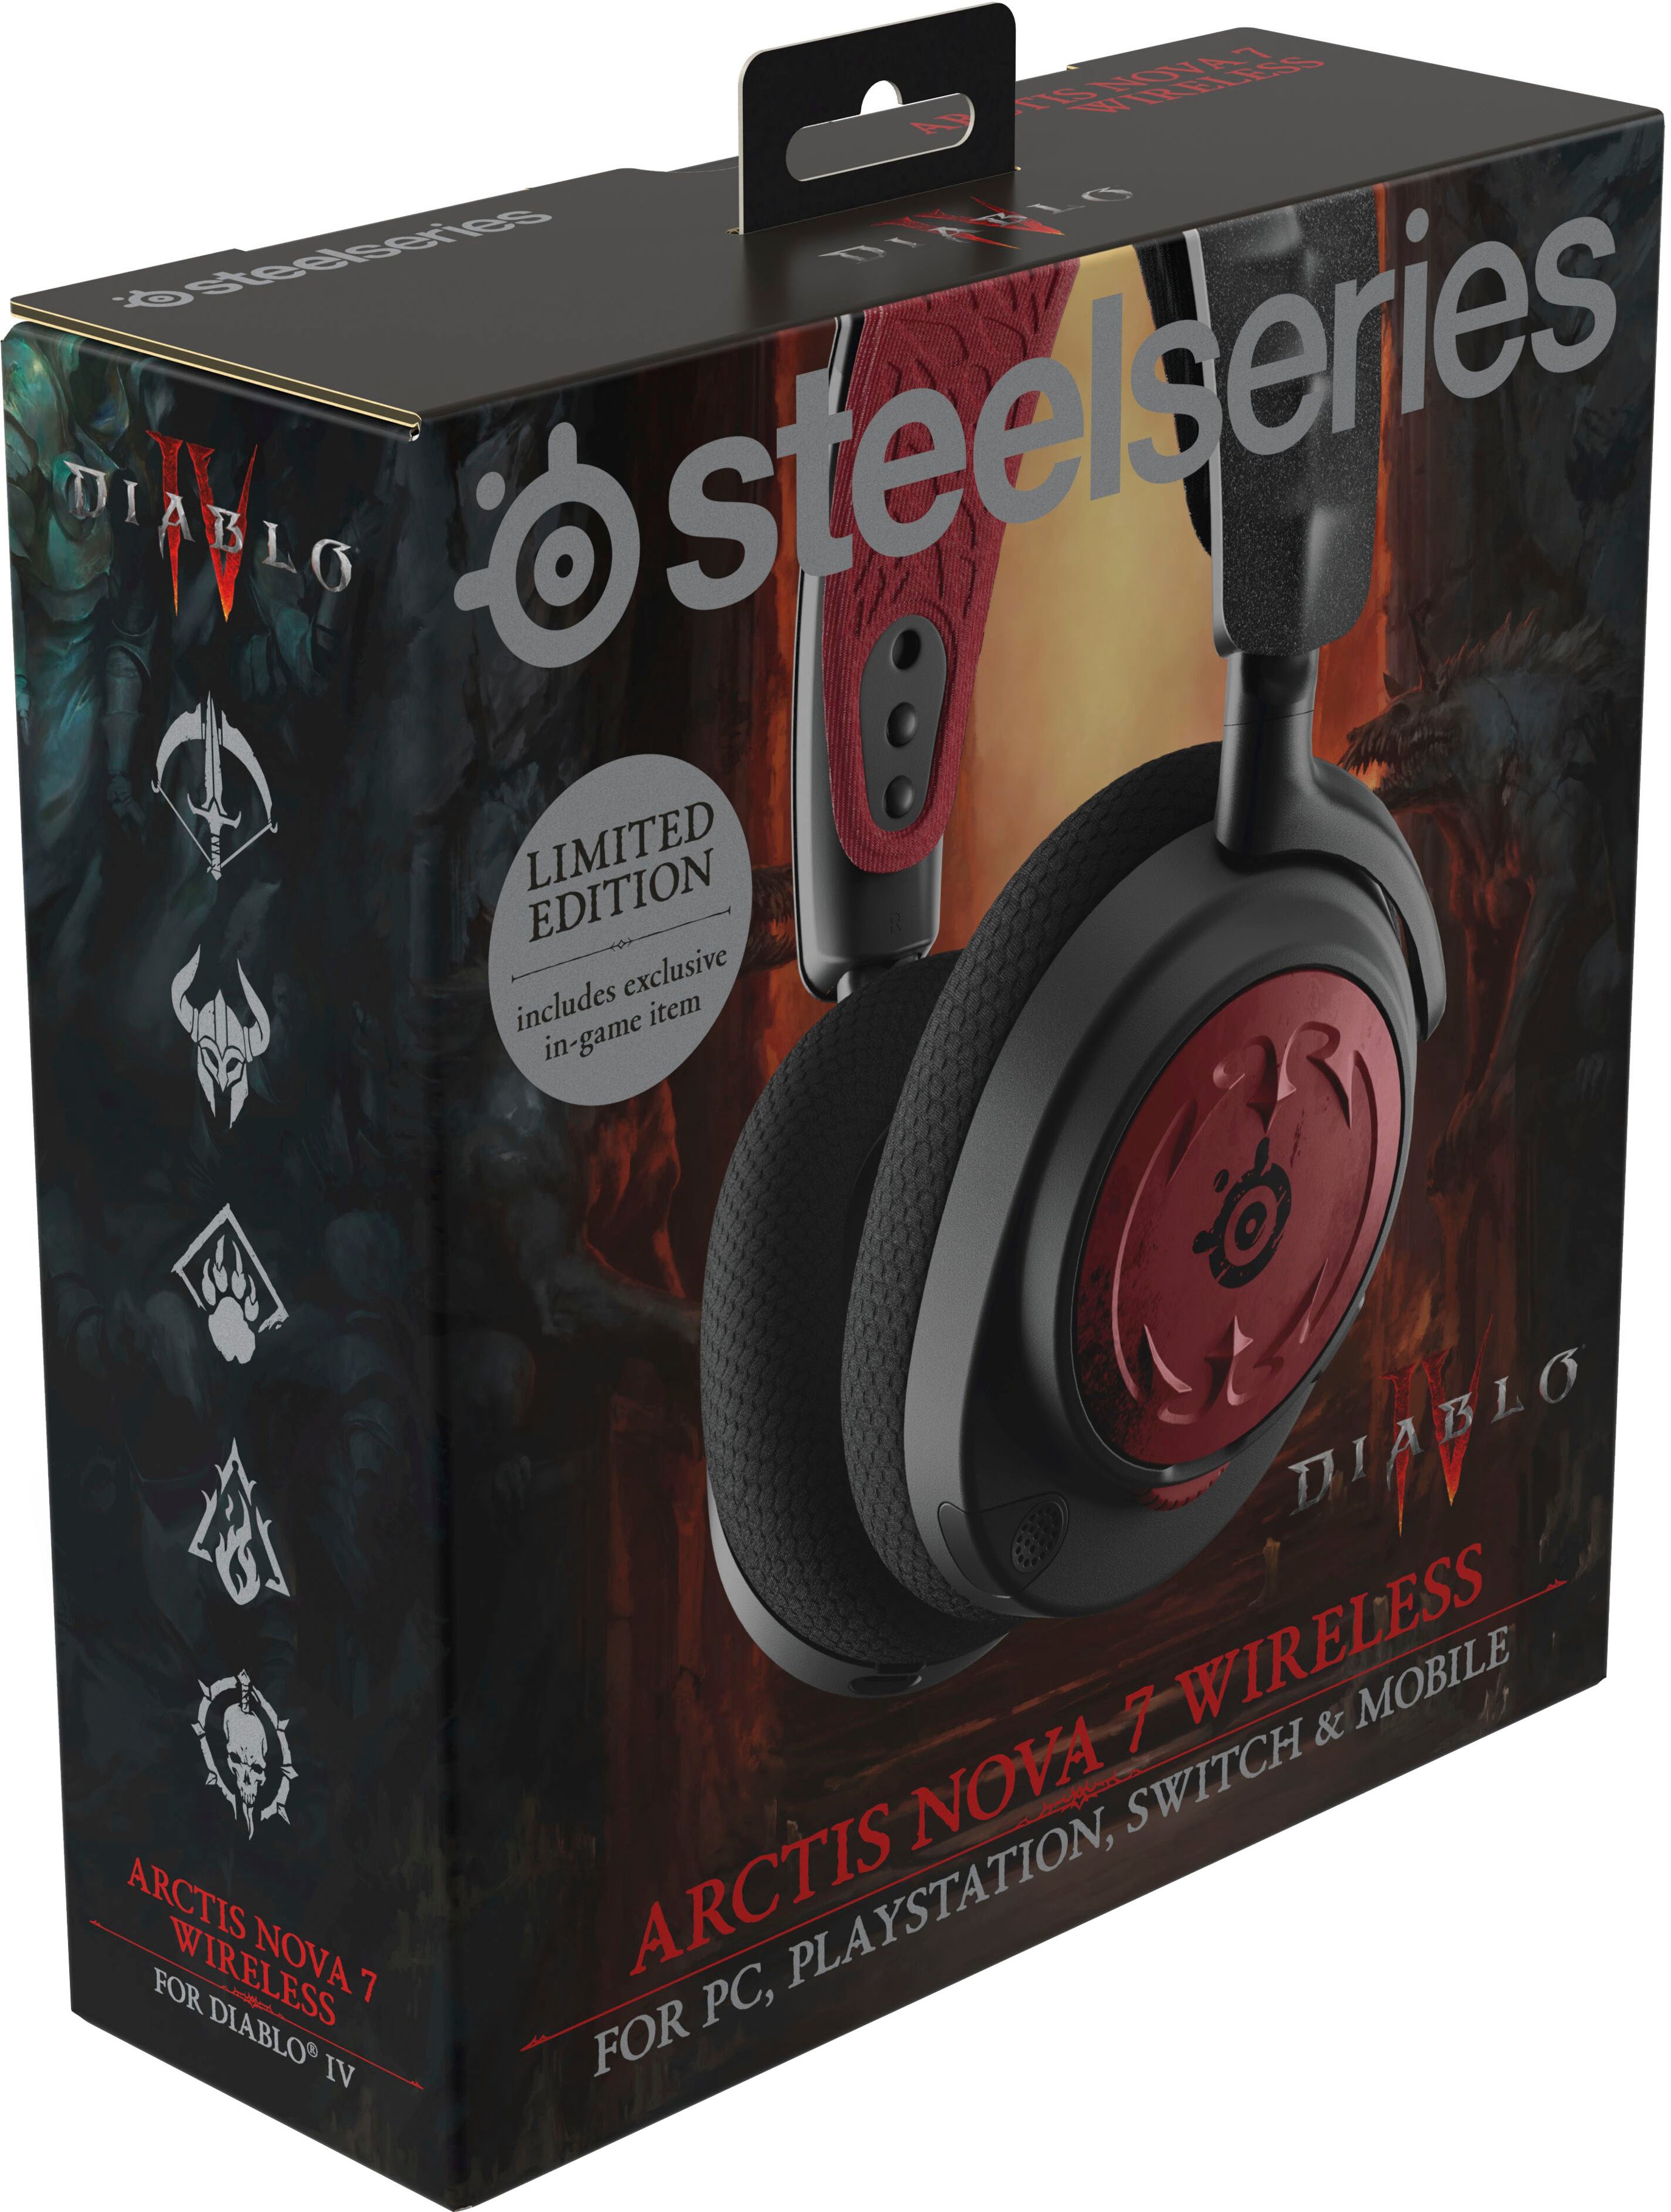 Diablo® IV x SteelSeries Limited Edition Collection